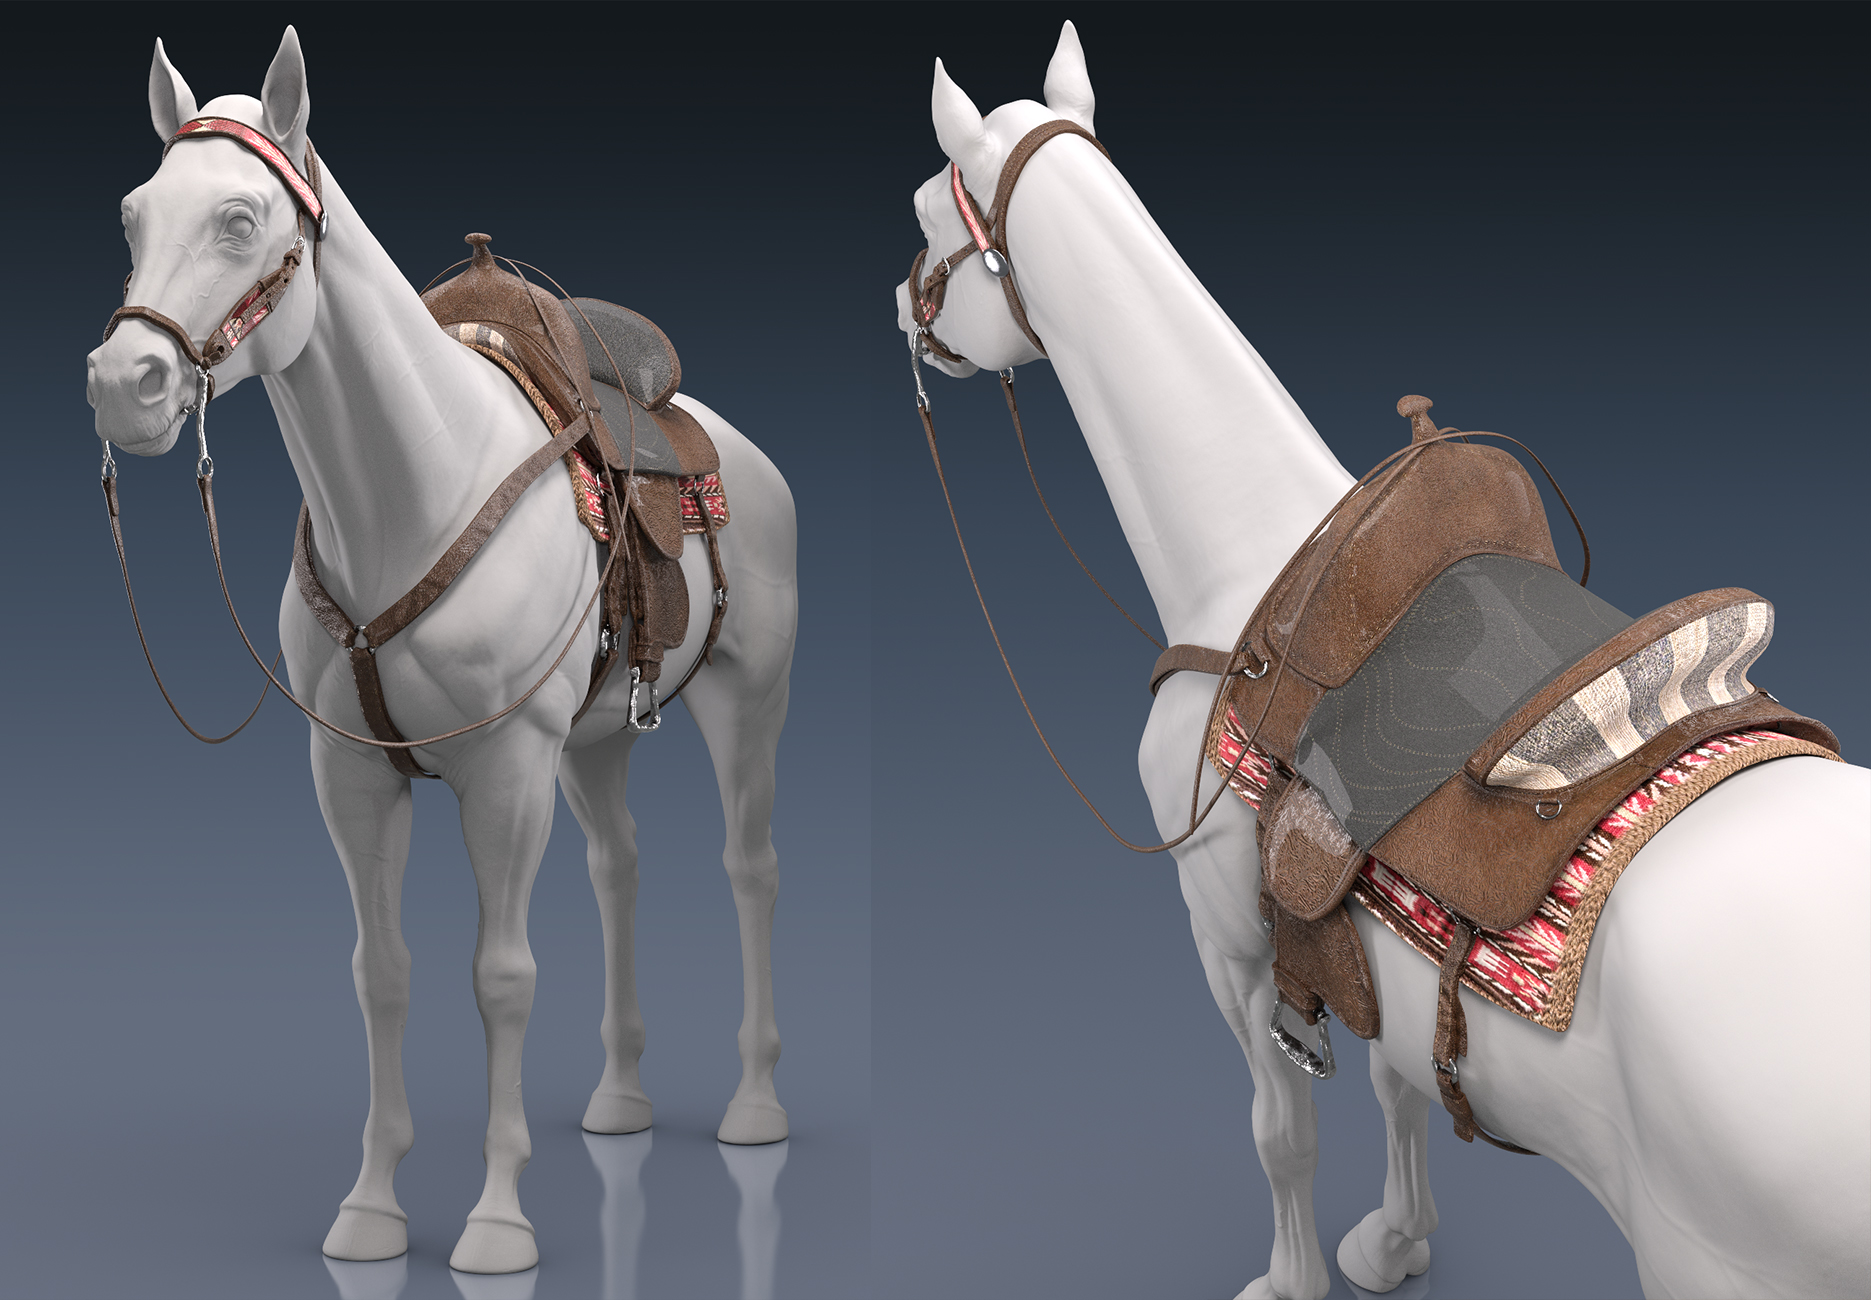 Western Horse Tack for Daz Horse 3 by: Sixus1 Media, 3D Models by Daz 3D